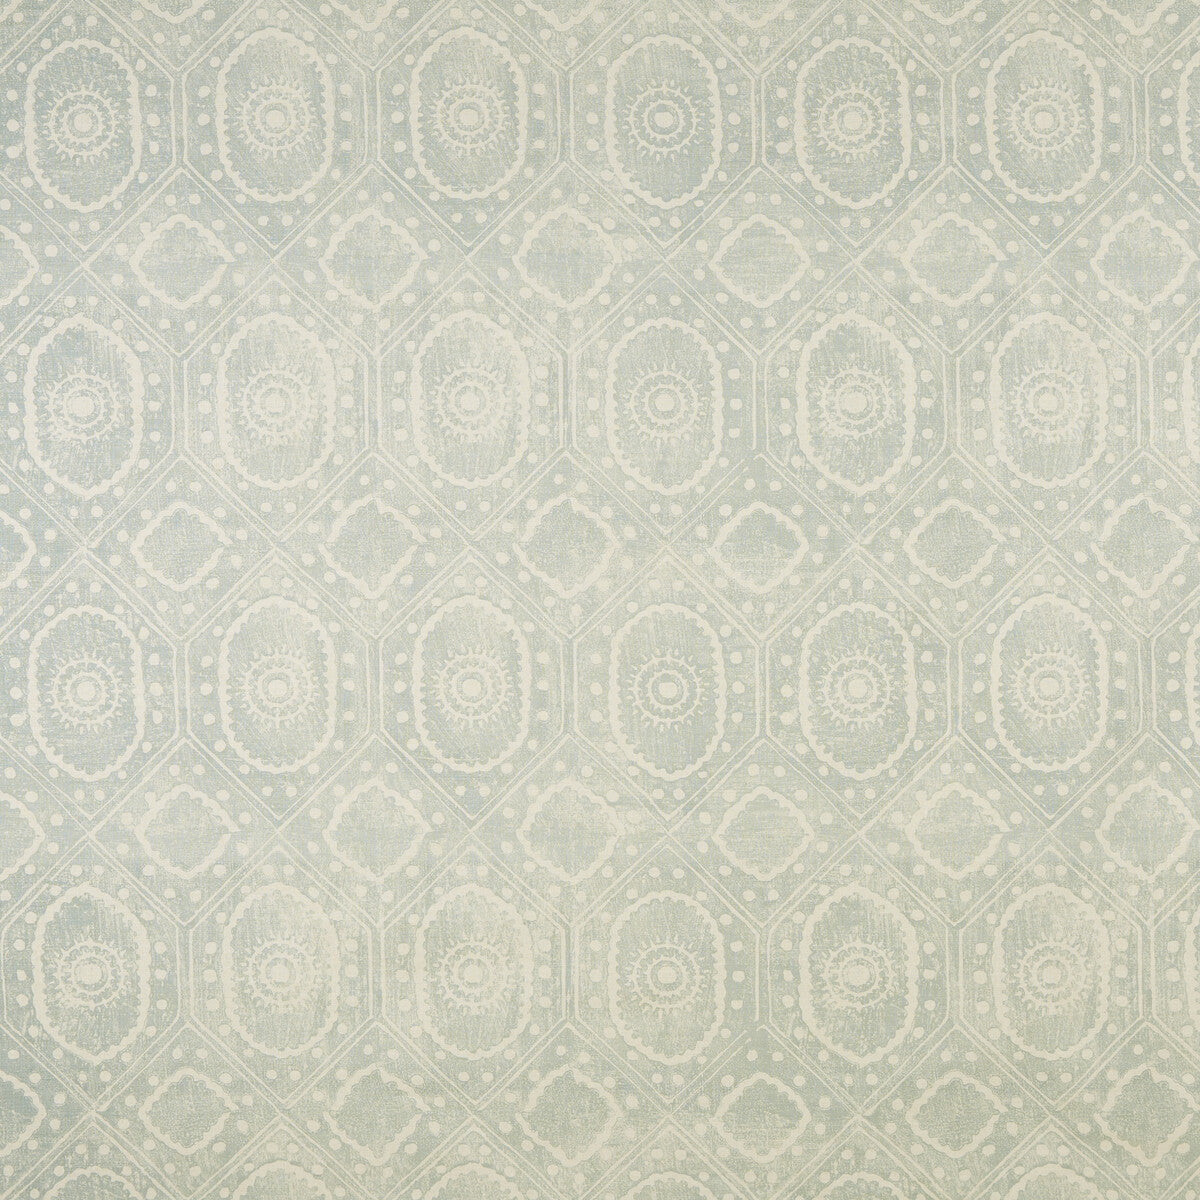 Diamond fabric in aqua color - pattern BFC-3643.13.0 - by Lee Jofa in the Blithfield collection